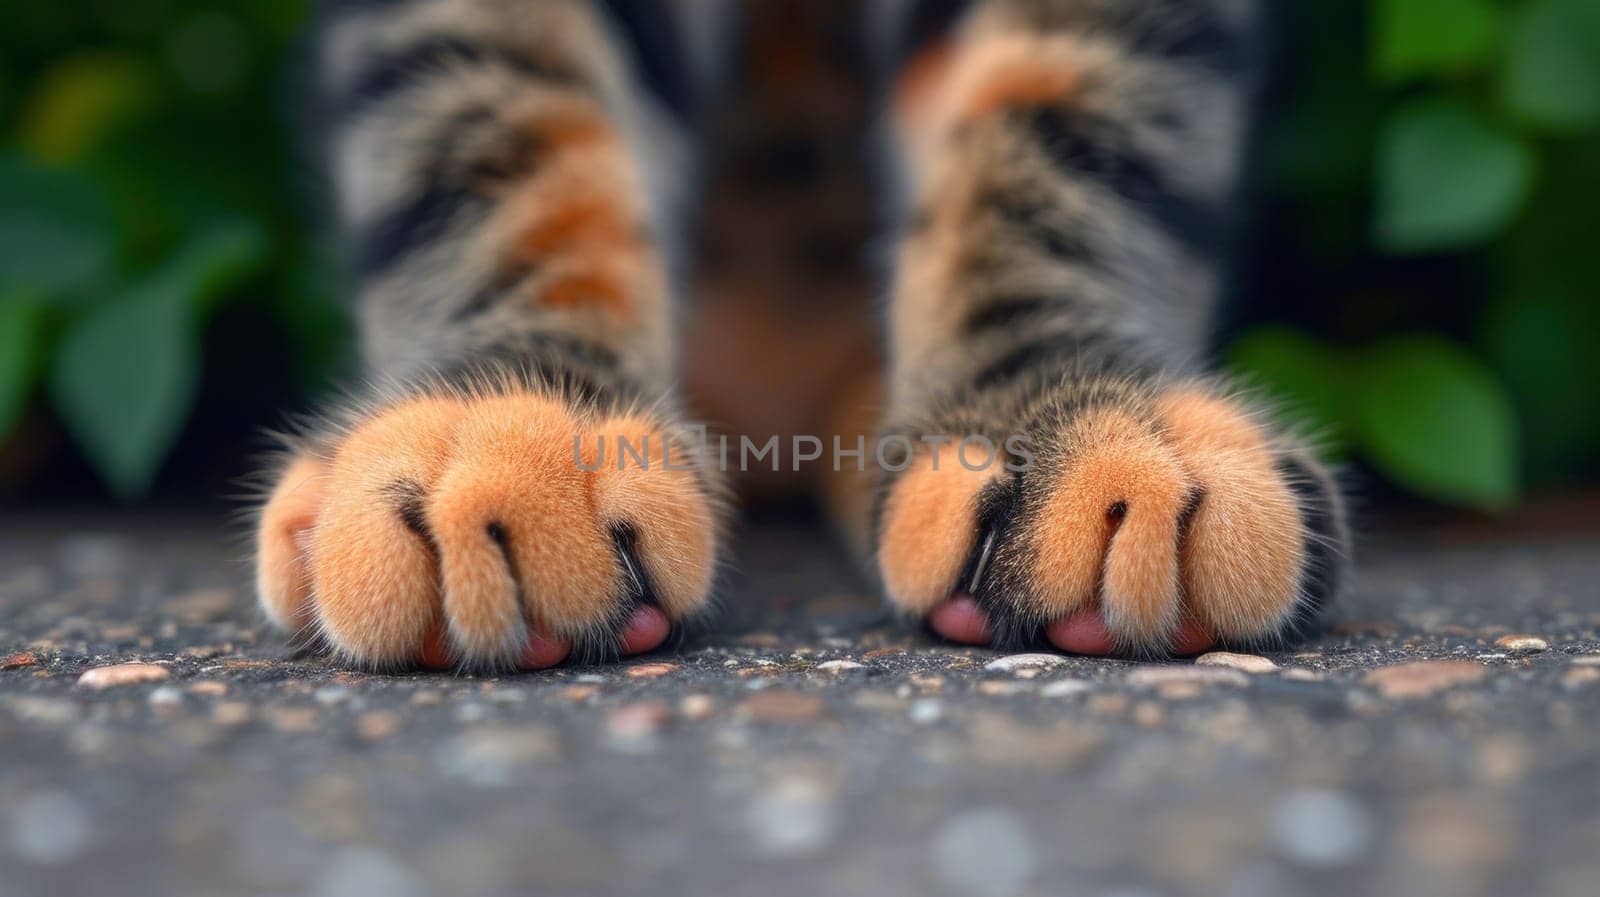 A close up of a cat's paw with its claws out